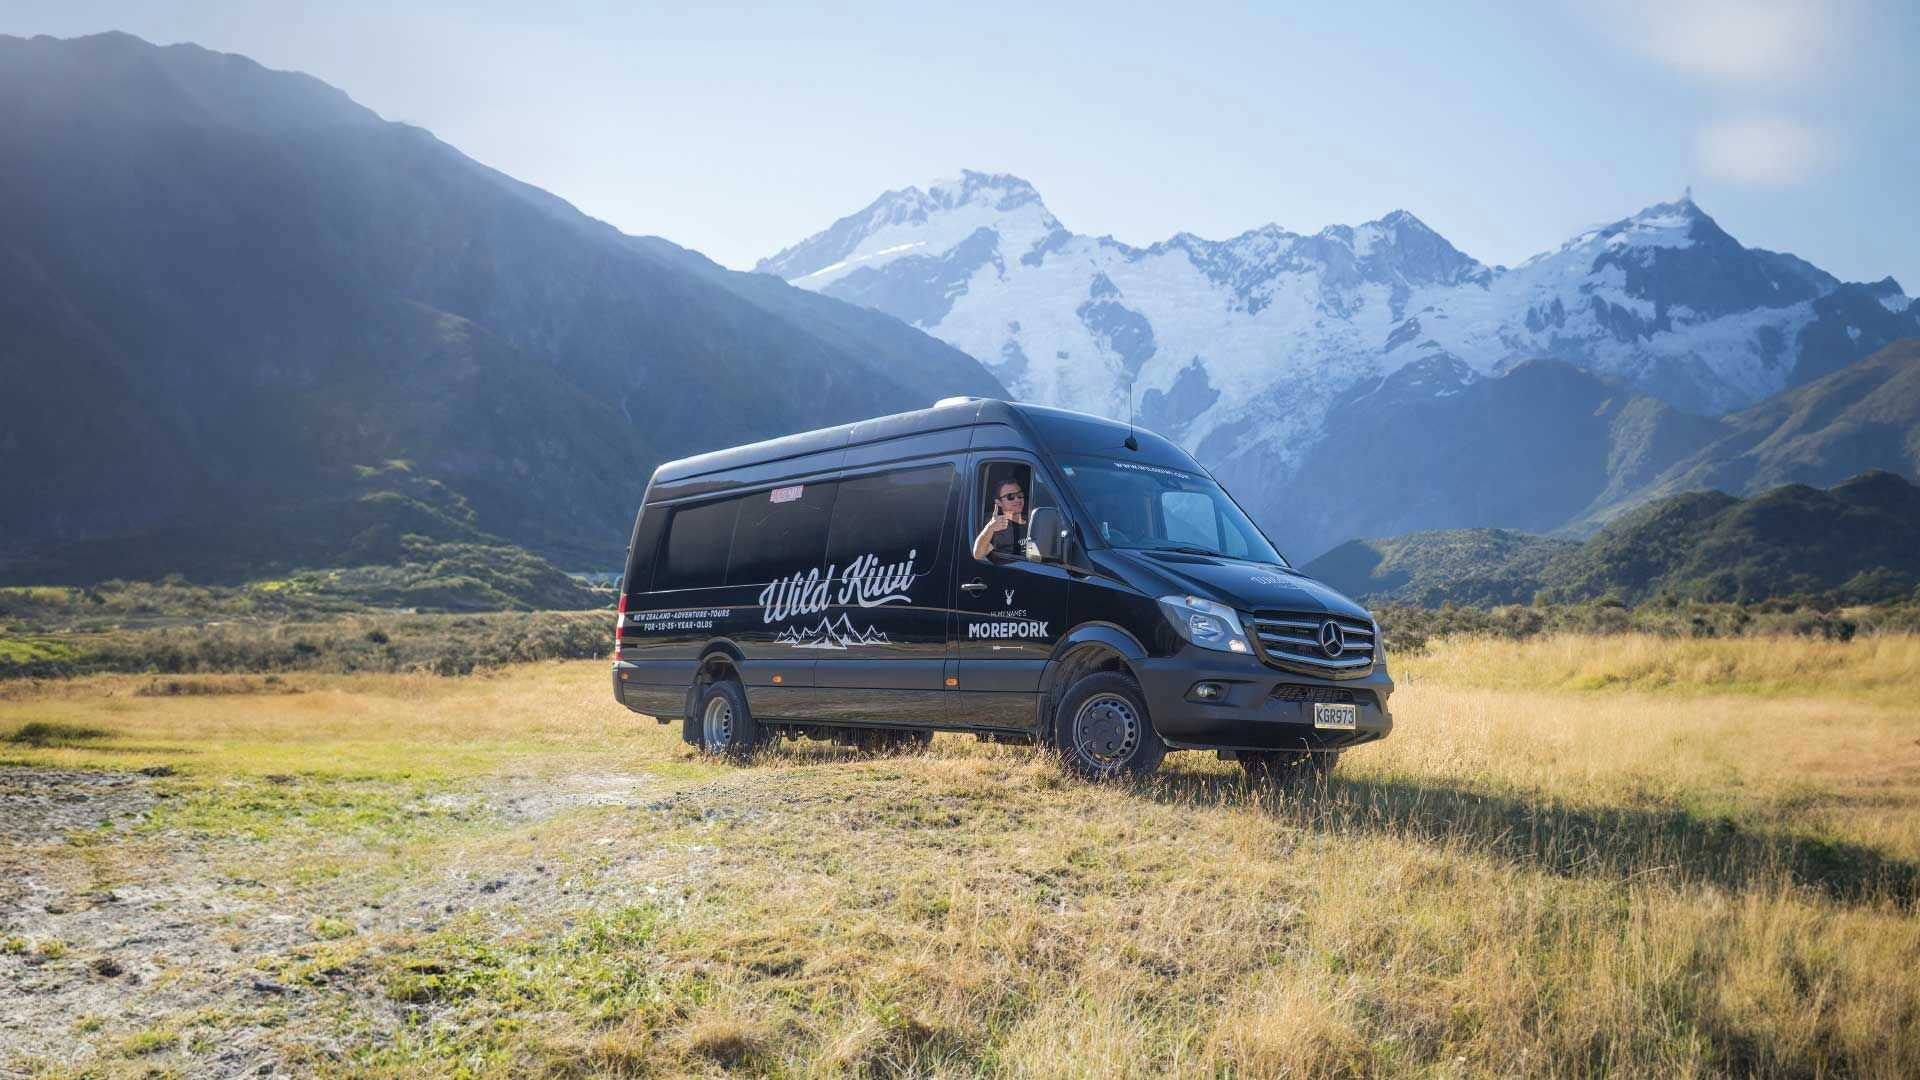 Wild Kiwi vehicle parked in front of some mountains in New Zealand